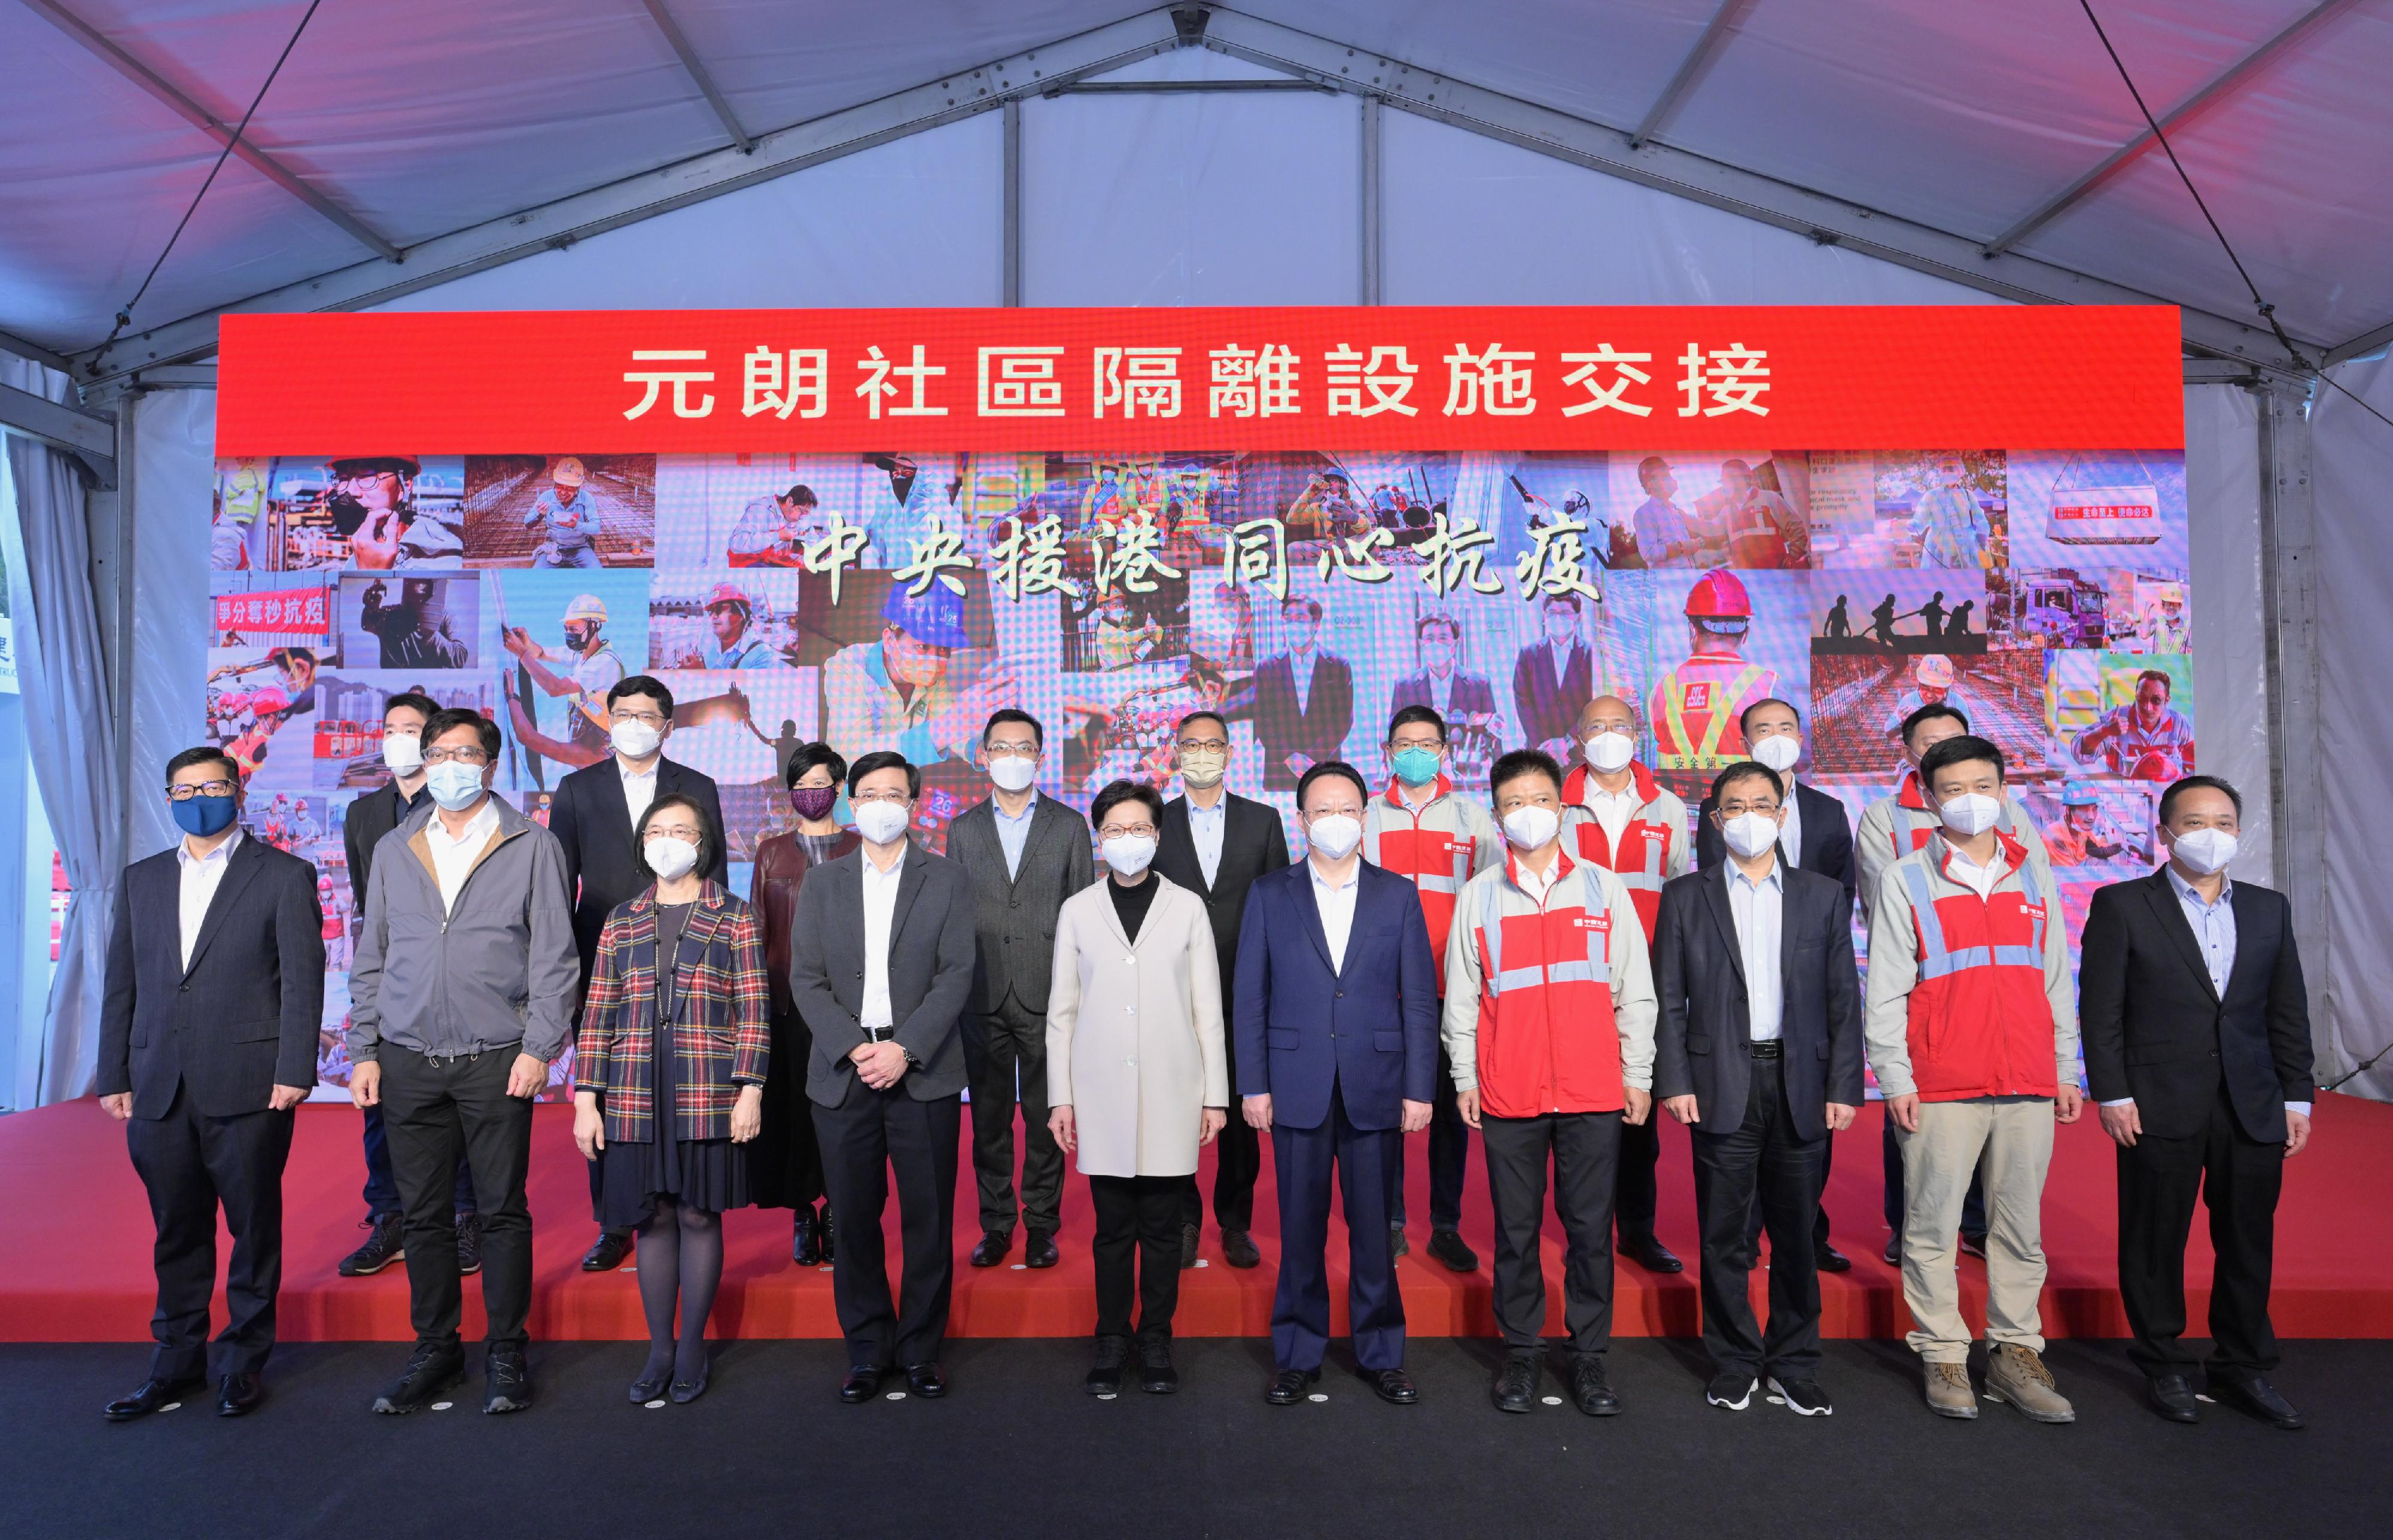 The Chief Executive, Mrs Carrie Lam, this afternoon (March 24) visited the sixth community isolation facility constructed with Mainland support in Yuen Long. Photo shows Mrs Lam (front row, fifth left); the Deputy Director of the Liaison Office of the Central People's Government in the Hong Kong Special Administrative Region Mr Tan Tieniu (front row, fifth right); the Chairman and Non-executive Director of China State Construction International Holdings Limited, Mr Yan Jianguo (front row, fourth right); the Chief Secretary for Administration, Mr John Lee (front row, fourth left); the Secretary for Food and Health, Professor Sophia Chan (front row, third left); the Secretary for Development, Mr Michael Wong (front row, second left); the Secretary for Security, Mr Tang Ping-keung (front row, first left); the Permanent Secretary for Development (Works), Mr Ricky Lau (back row, centre); the Director of Health, Dr Ronald Lam (back row, fourth left); the Director of Architectural Services, Ms Winnie Ho (back row, third left); the Chief Executive of the Hospital Authority, Dr Tony Ko (back row, second left), and other guests at the event.